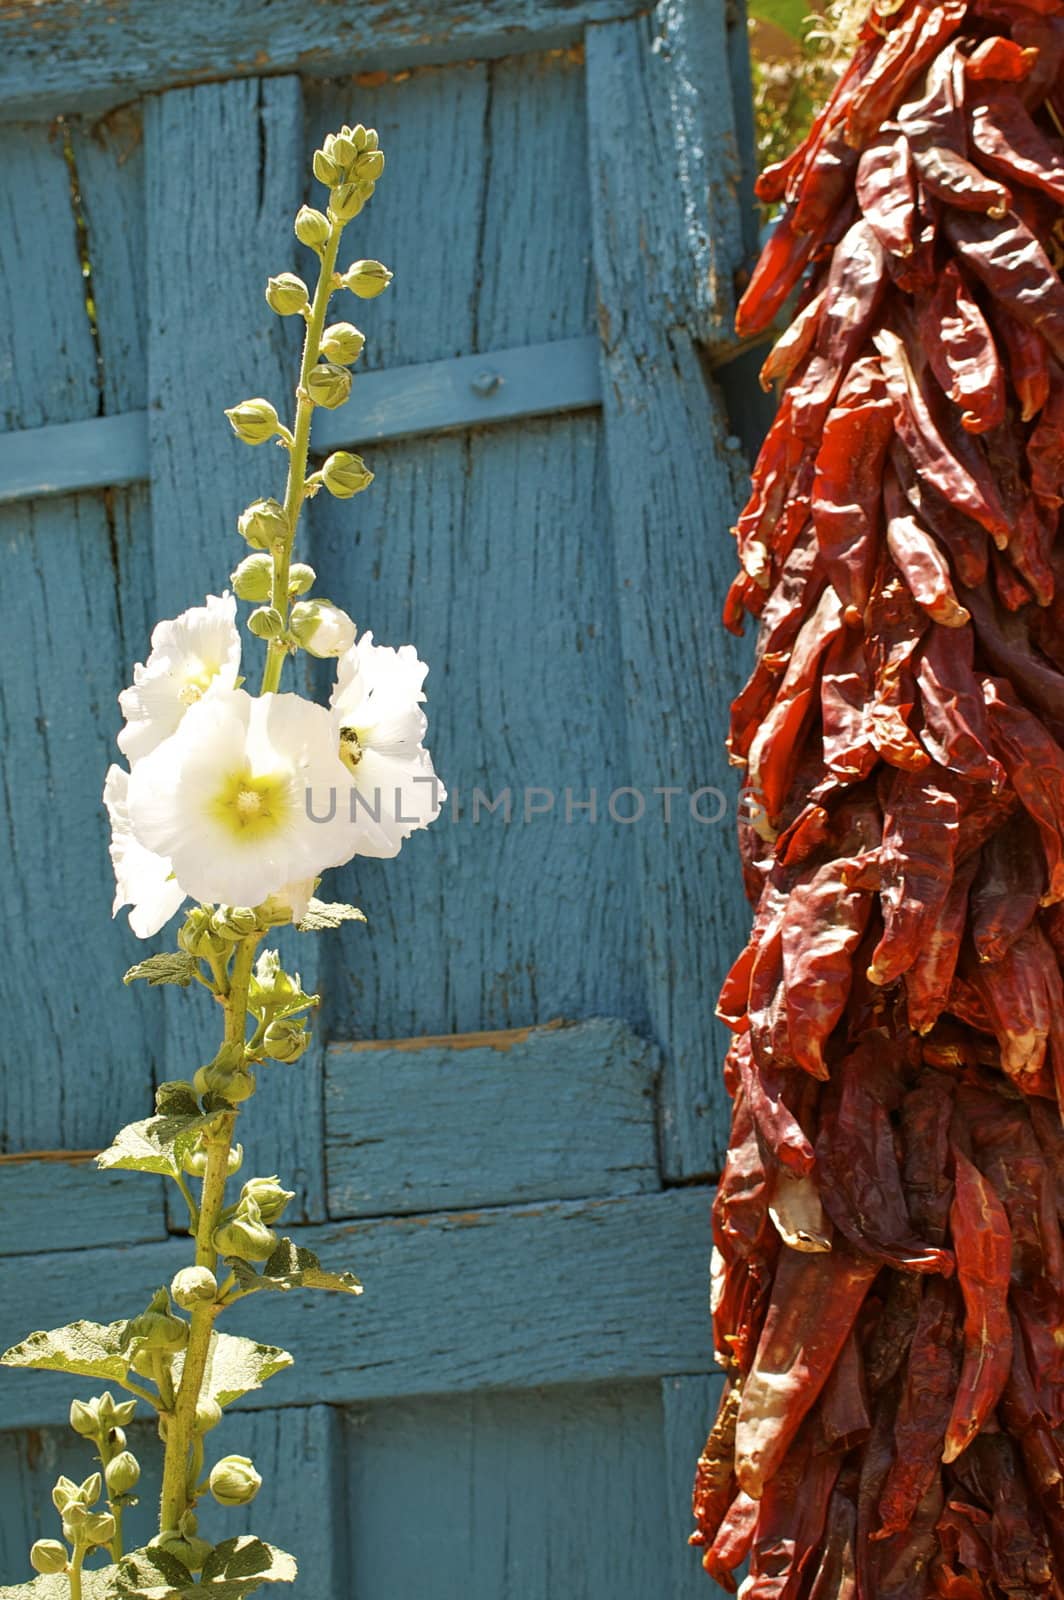 Red chili ristras against a rustic wooden door by PrincessToula